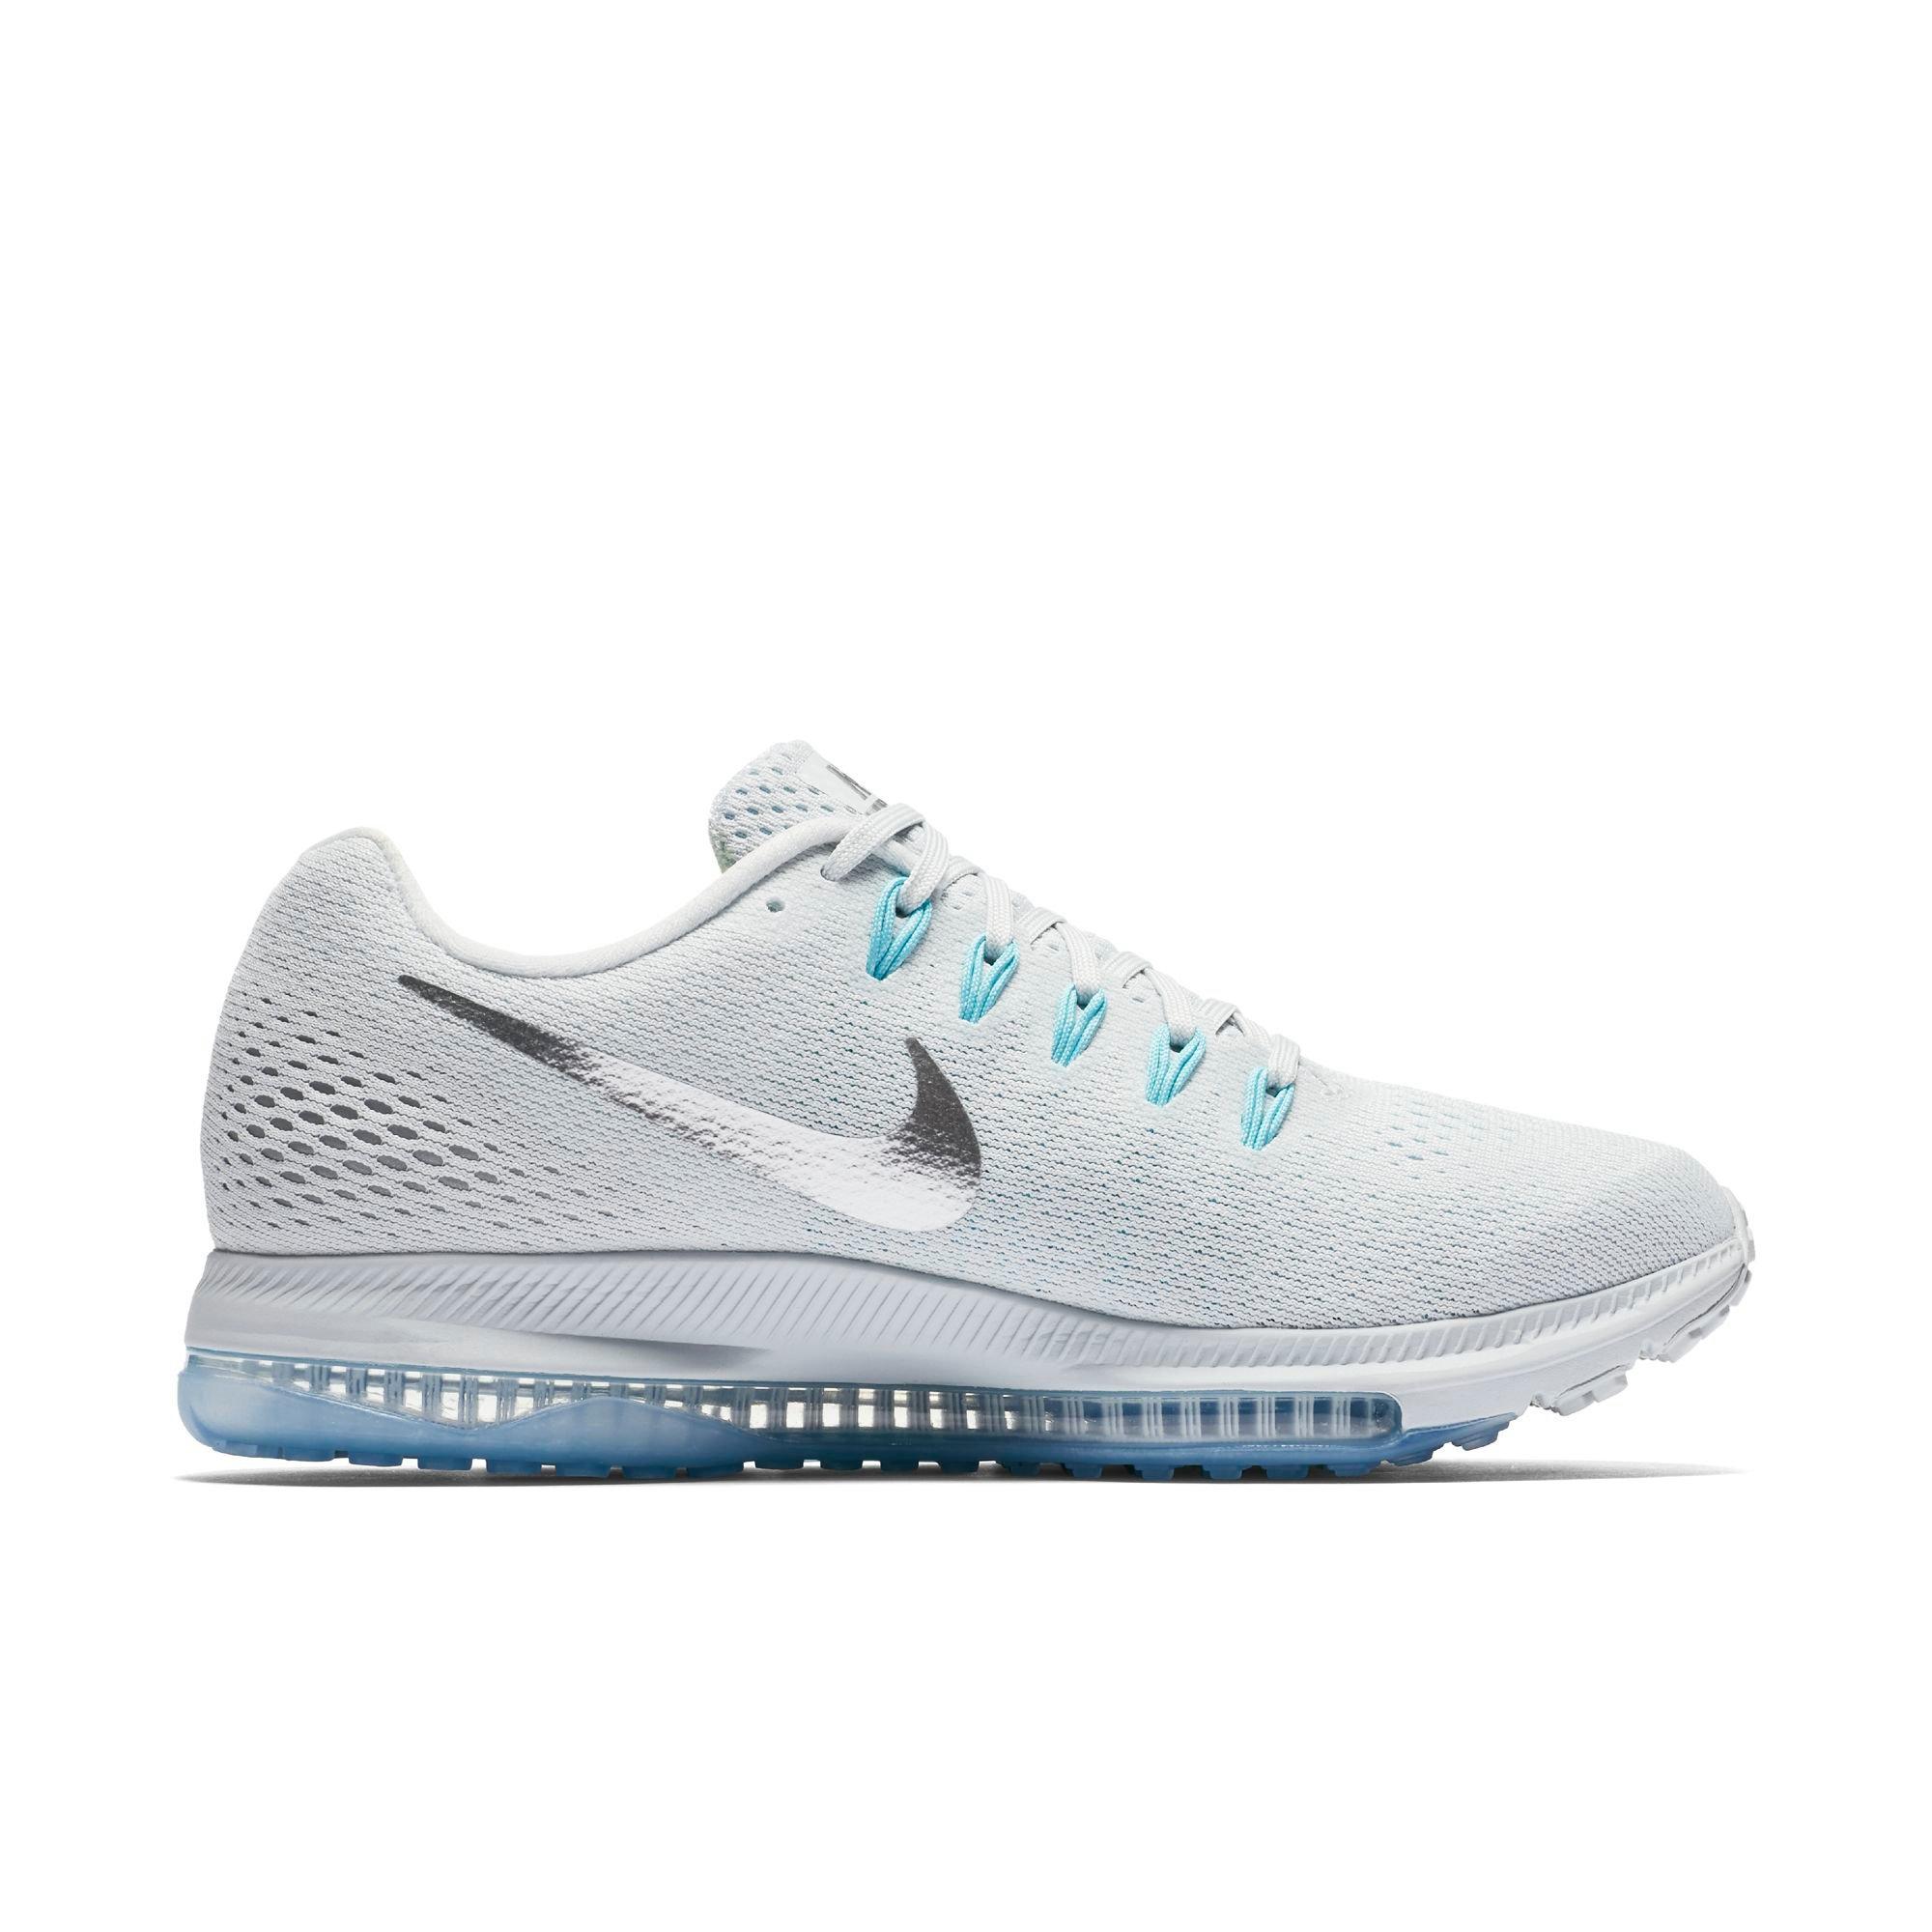 nike zoom all out low women's running shoe